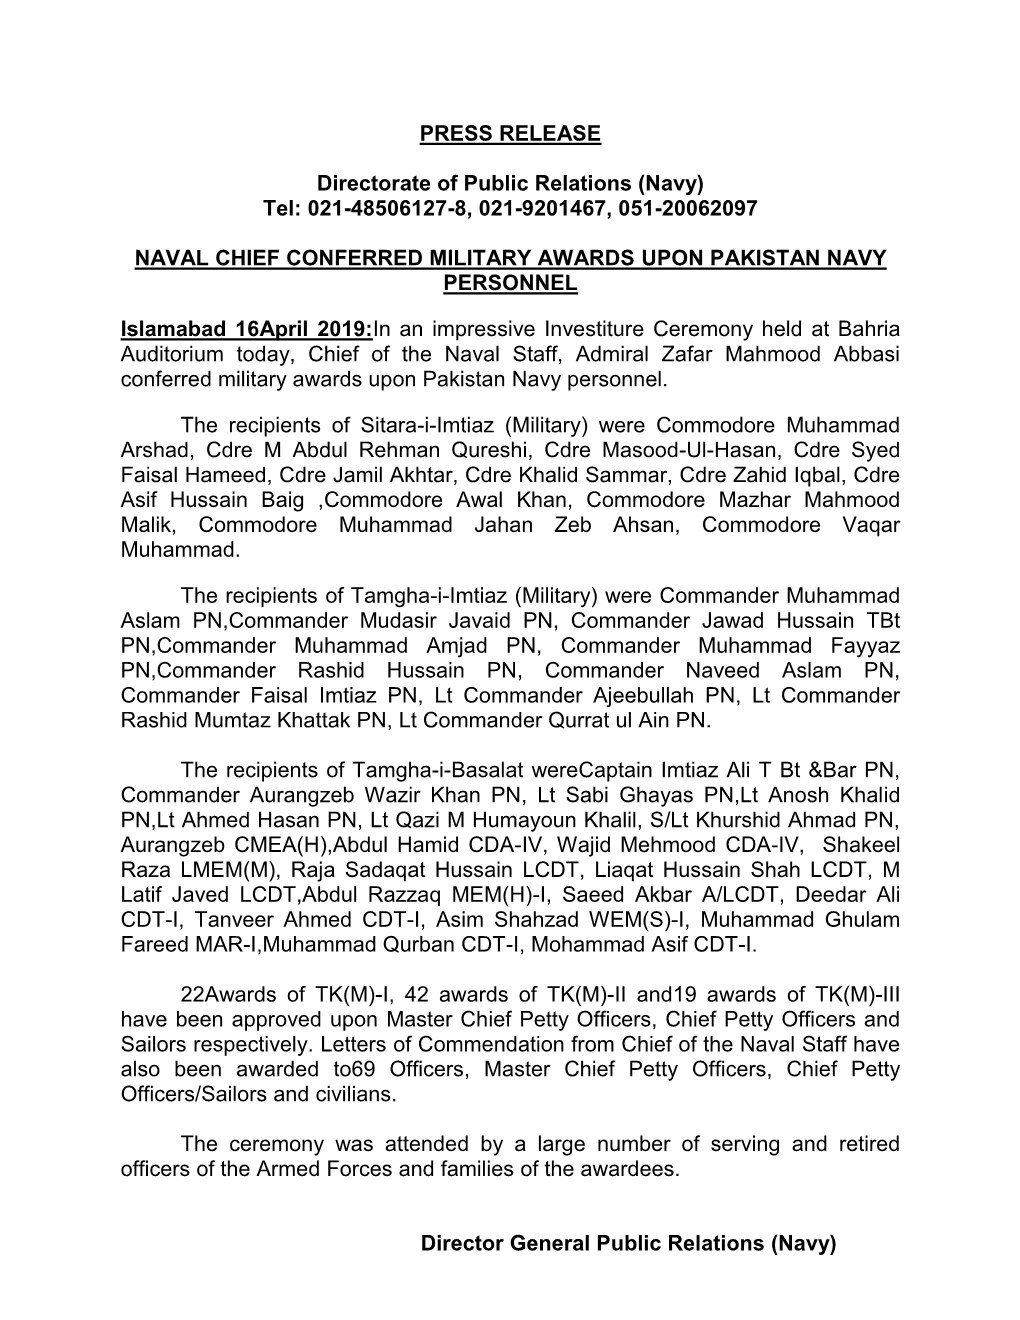 PRESS RELEASE Directorate of Public Relations